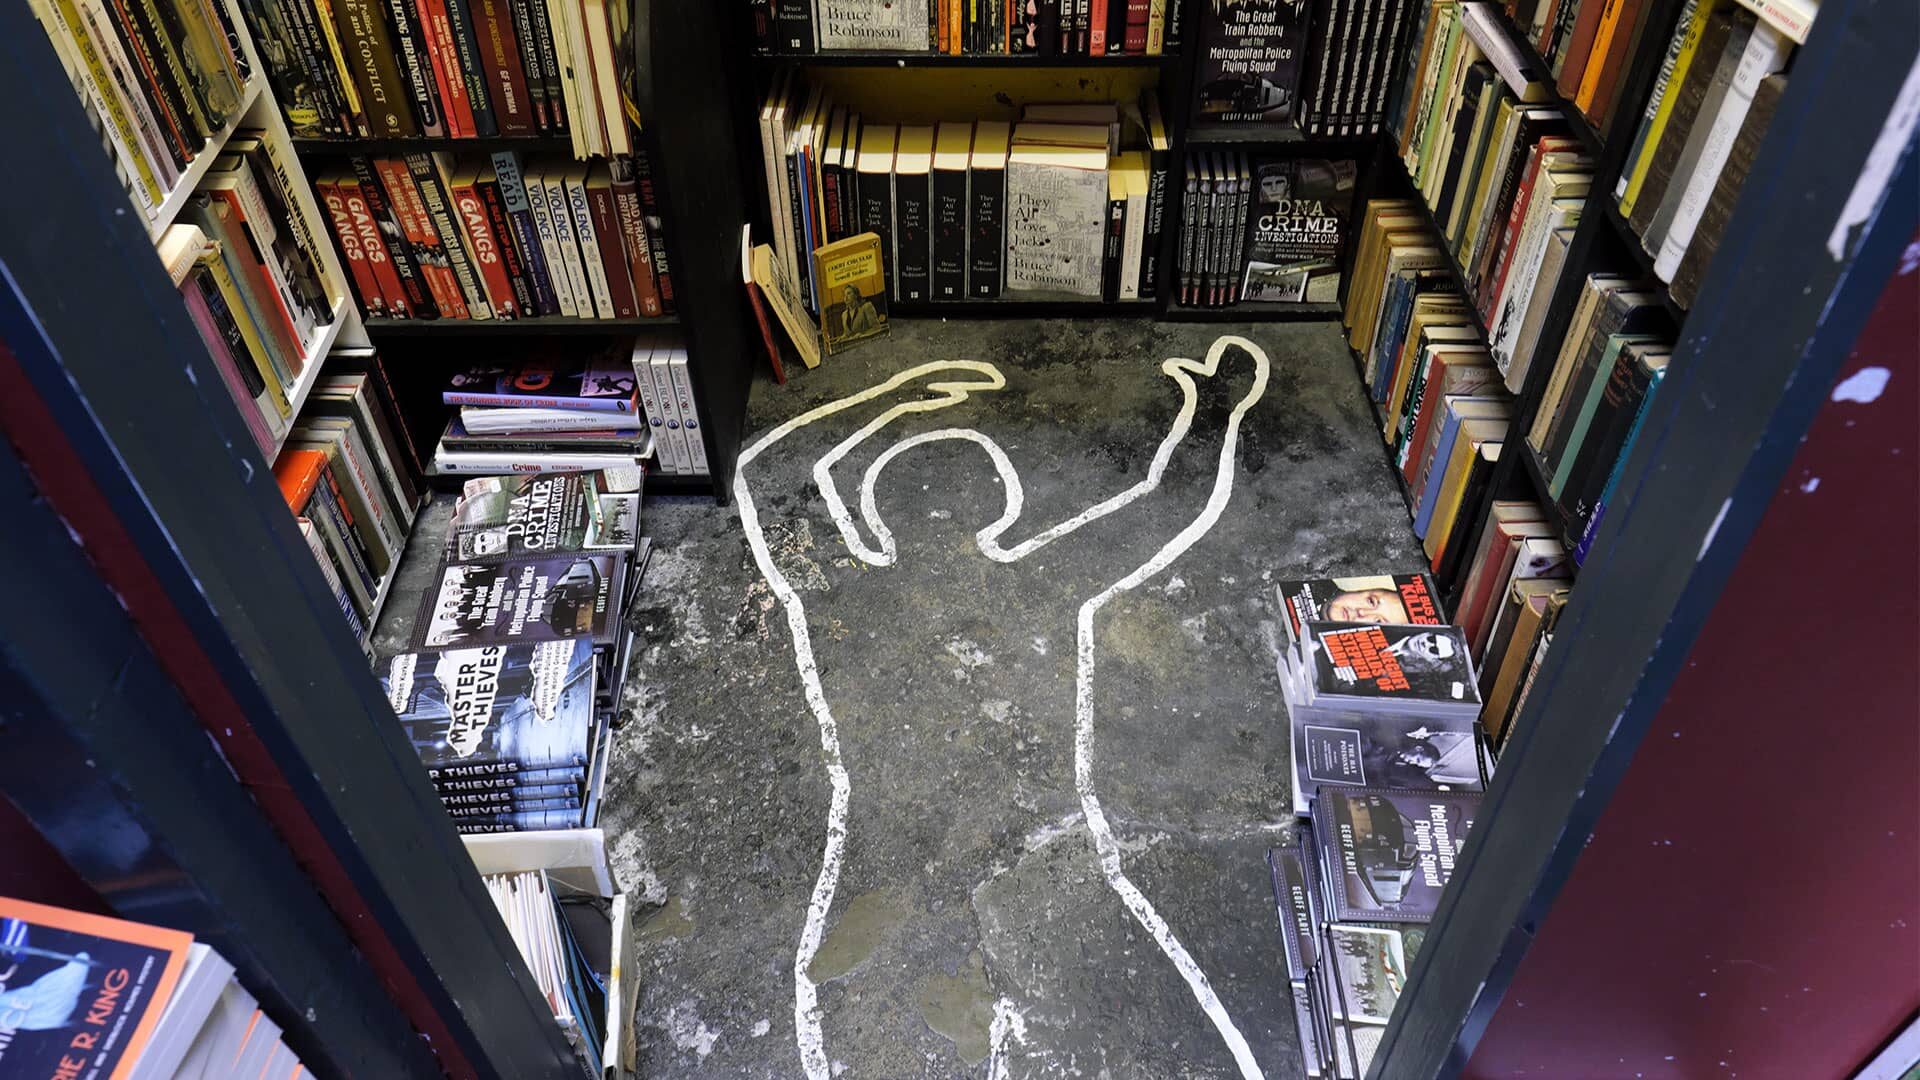 A chalked corpse outline is on the floor of a bookstore, surrounded by shelves filled with books